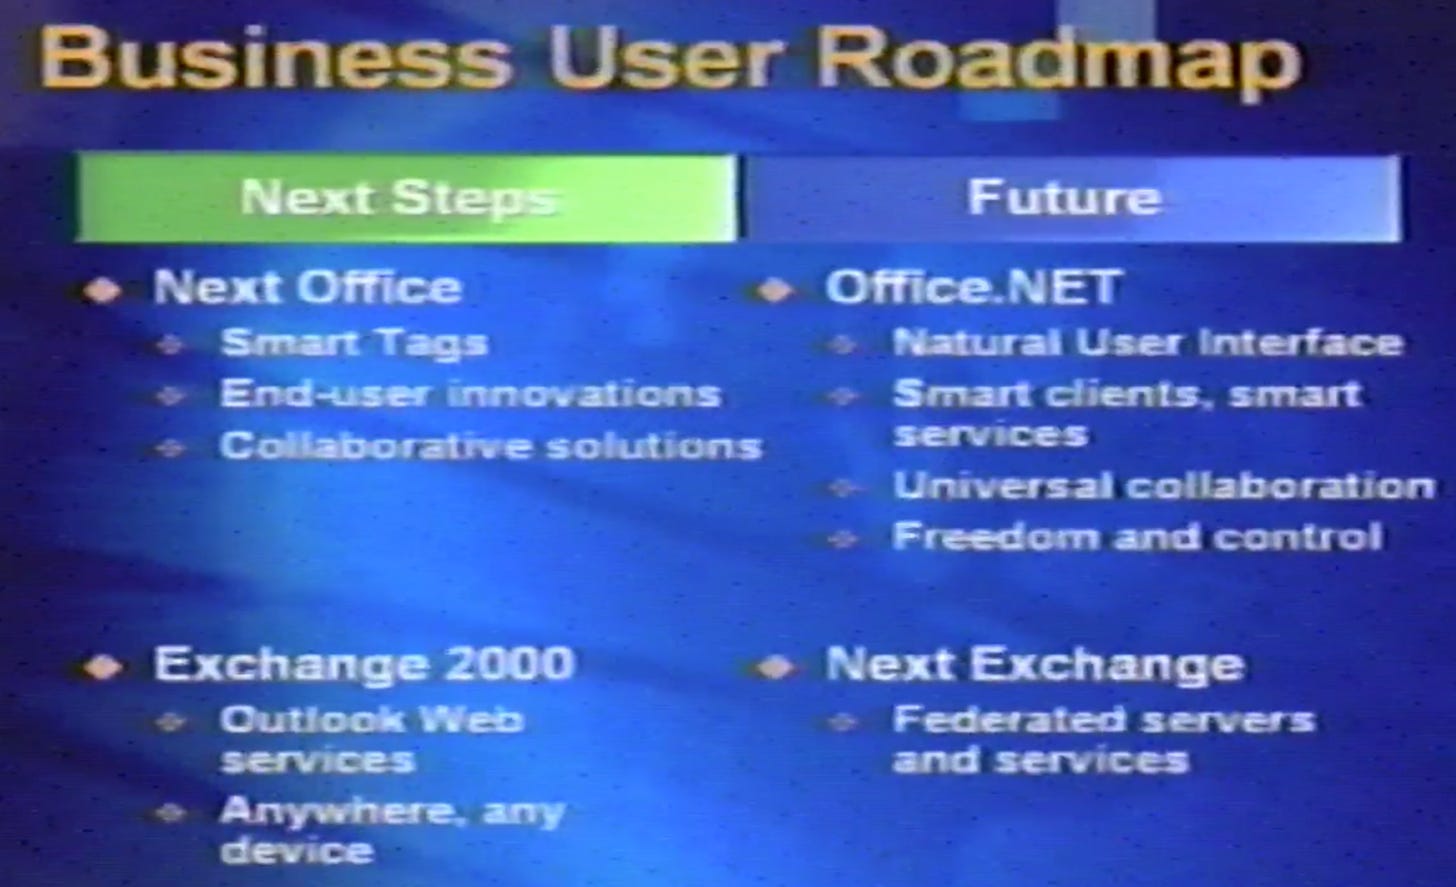 The Business User Roadmap includes Next Steps and Future. Under Next Steps is "Next Office" and Exchange 2000. Under future is Office.NET and Next Exchange.